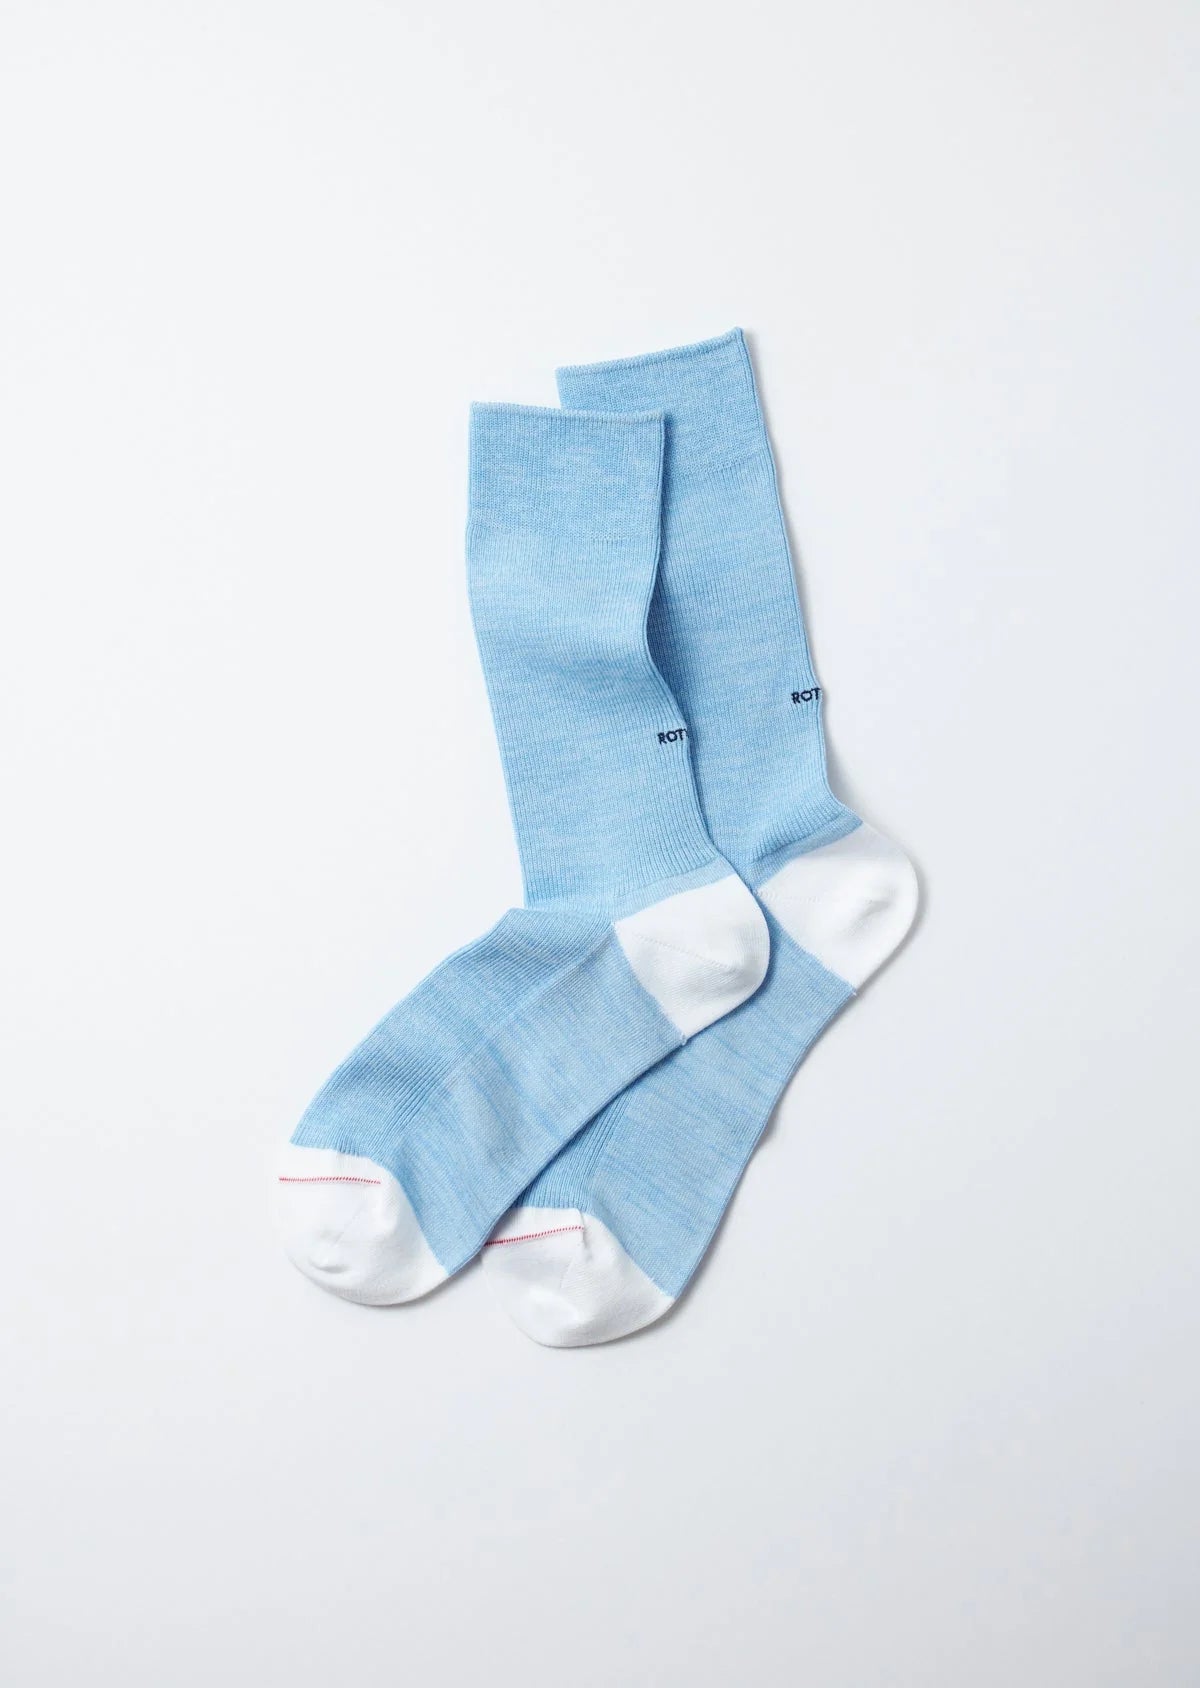 RoToTo ORGANIC COTTON ＆ RECYCLE POLYESTER RIBBED CREW SOCKS